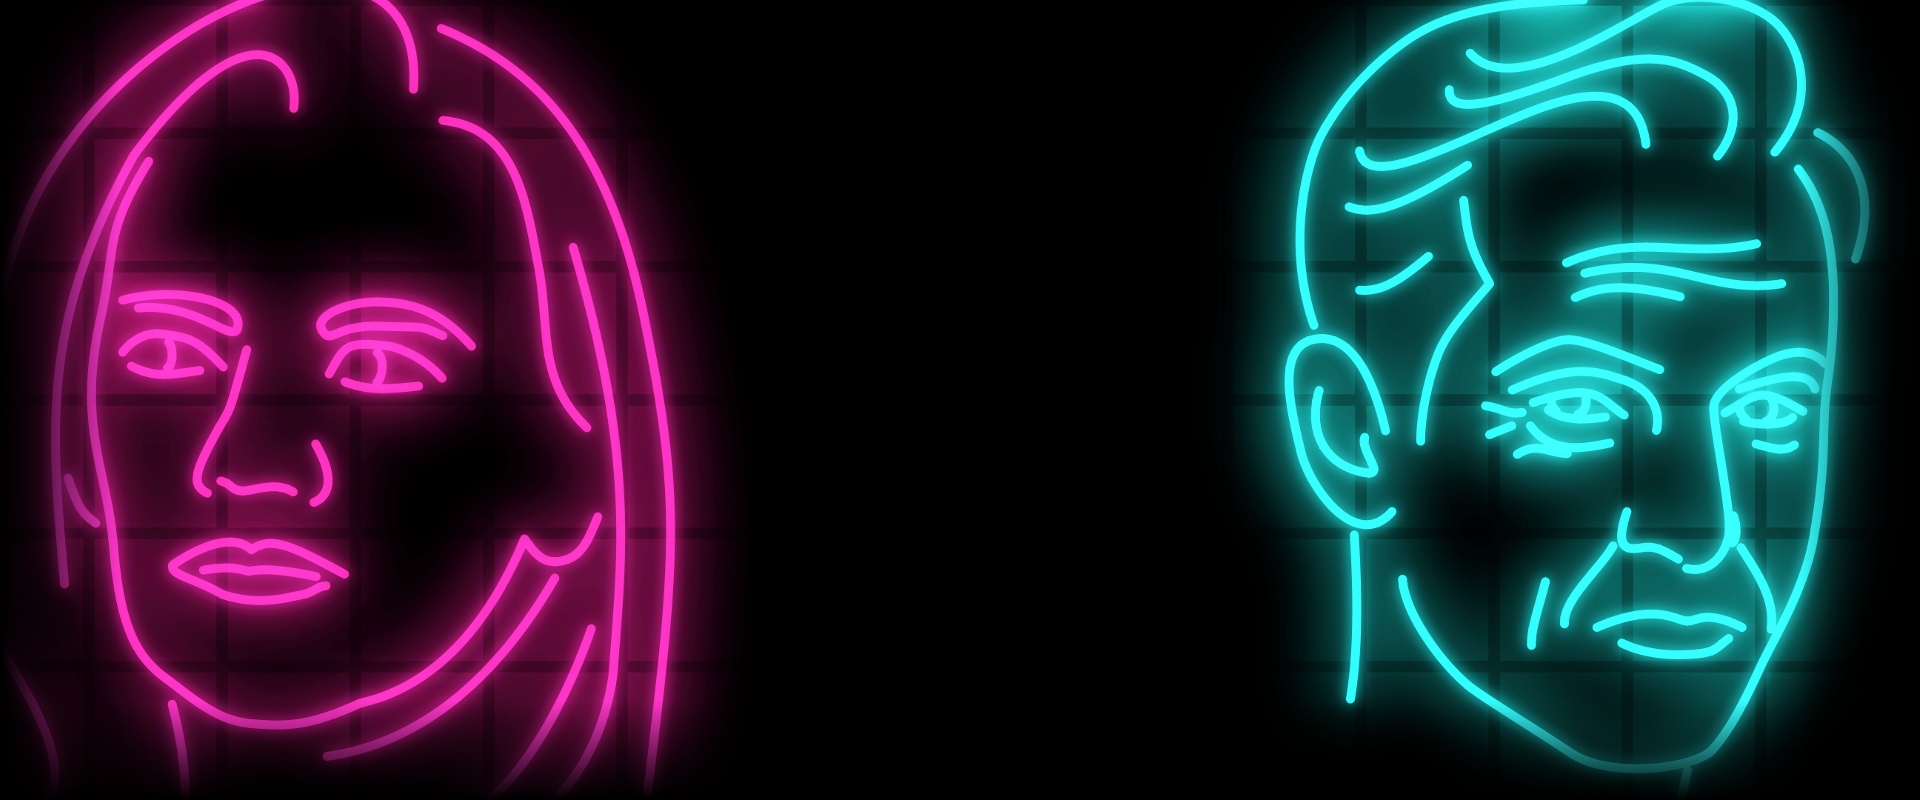 Video Game NEON STRUCT 1920x800